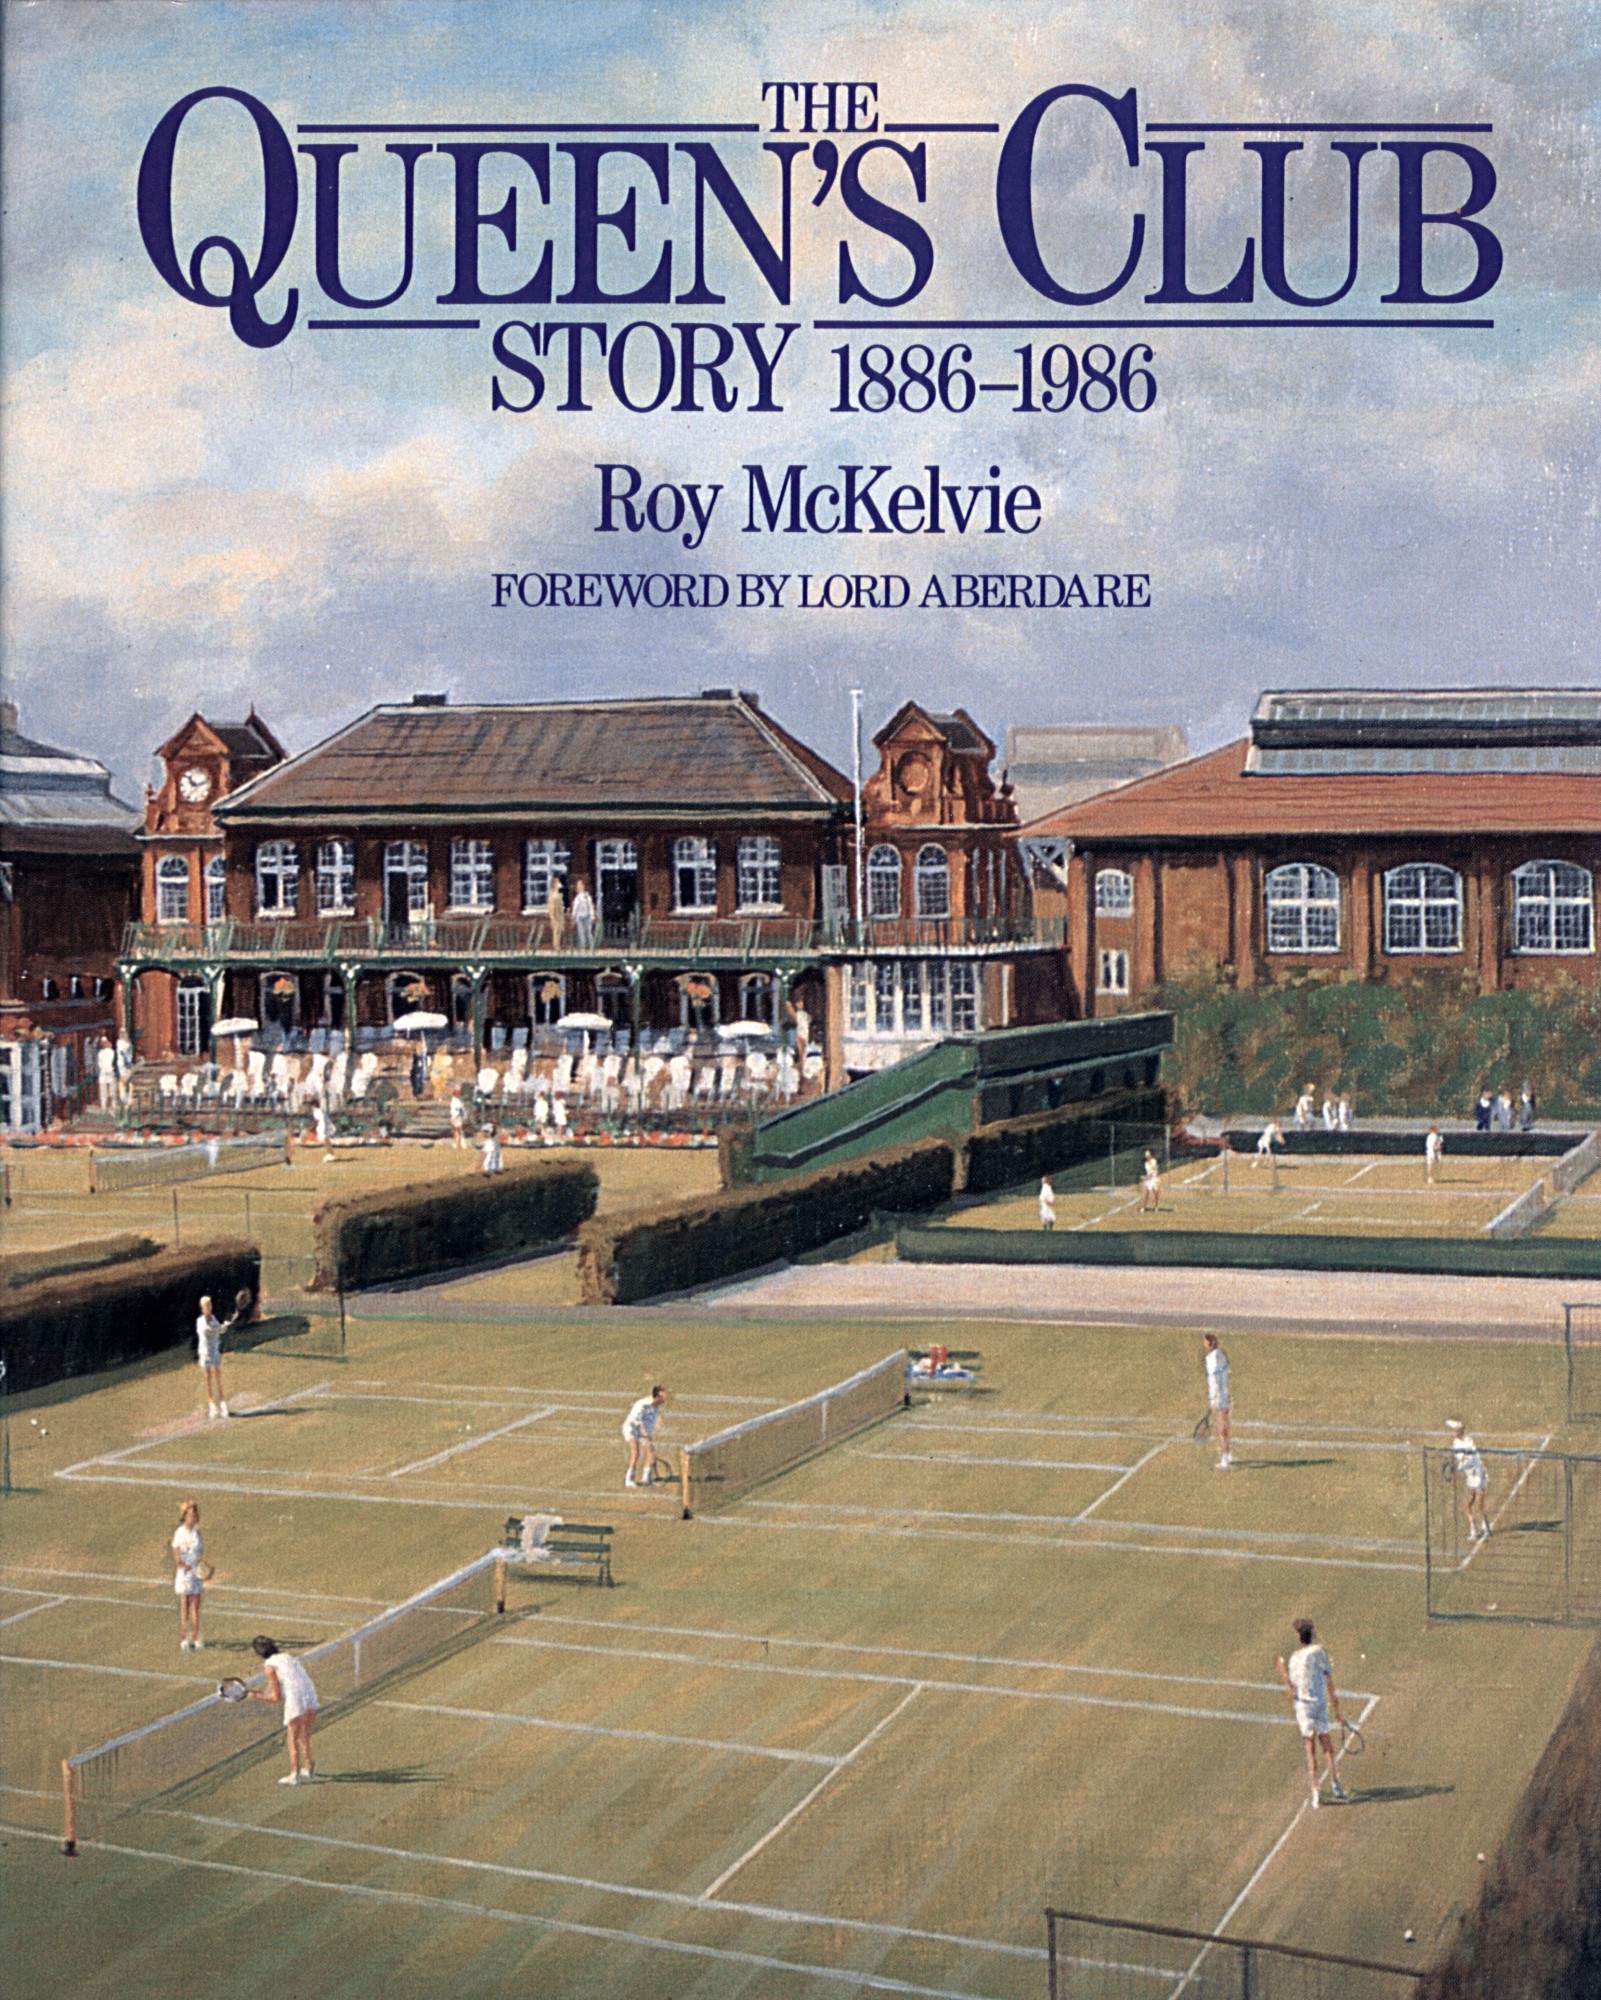 The Queen's Club Story 1886-1986